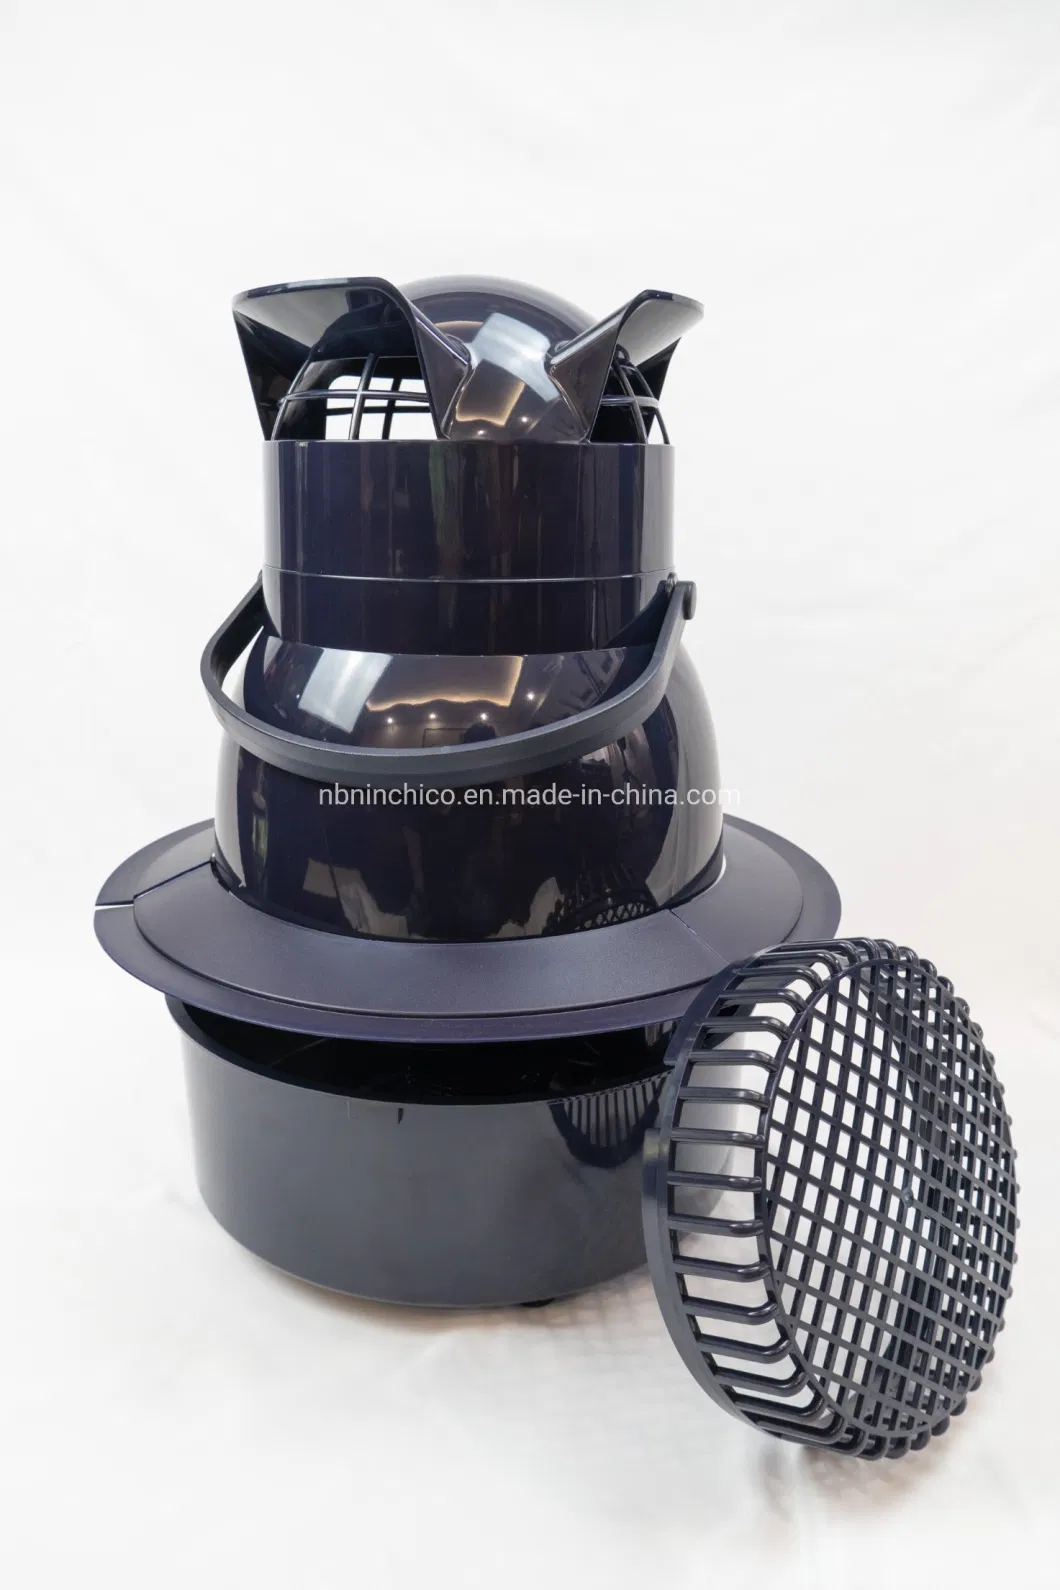 Big Power Air Humidifier for Swallow Home HL-5500